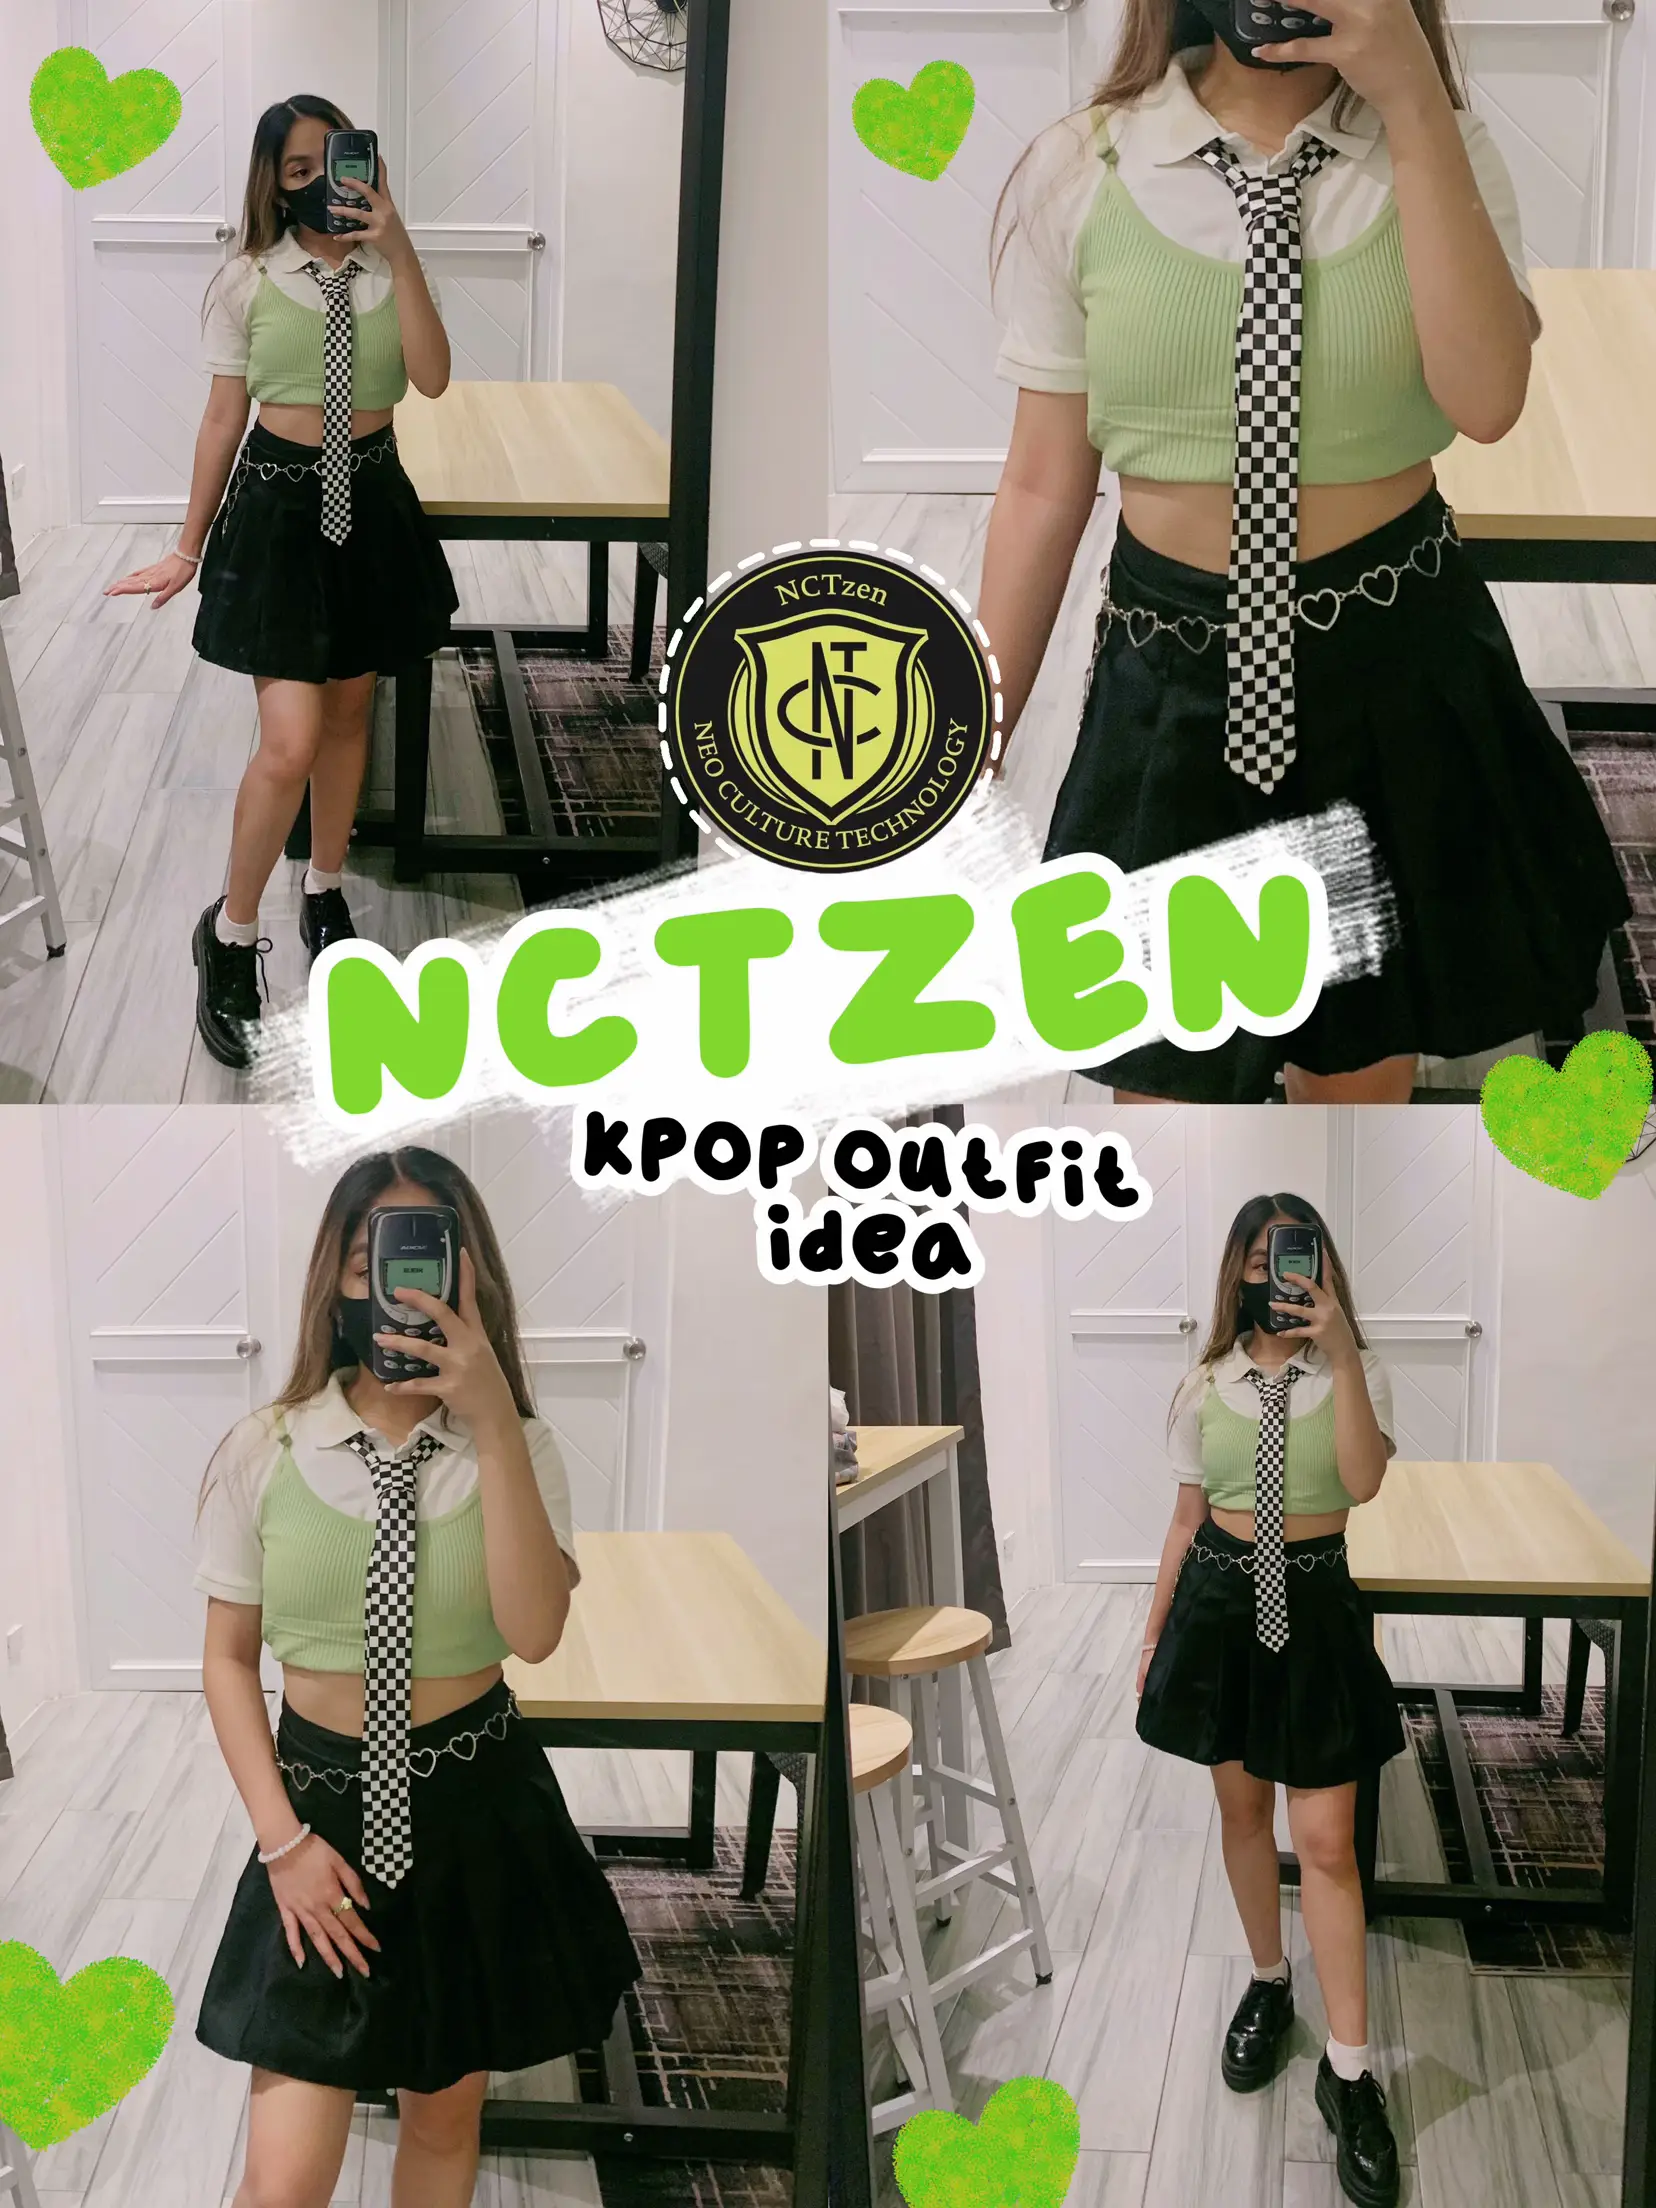 KPOP OUTFIT IDEA! | Article posted by marvs ✦ | Lemon8